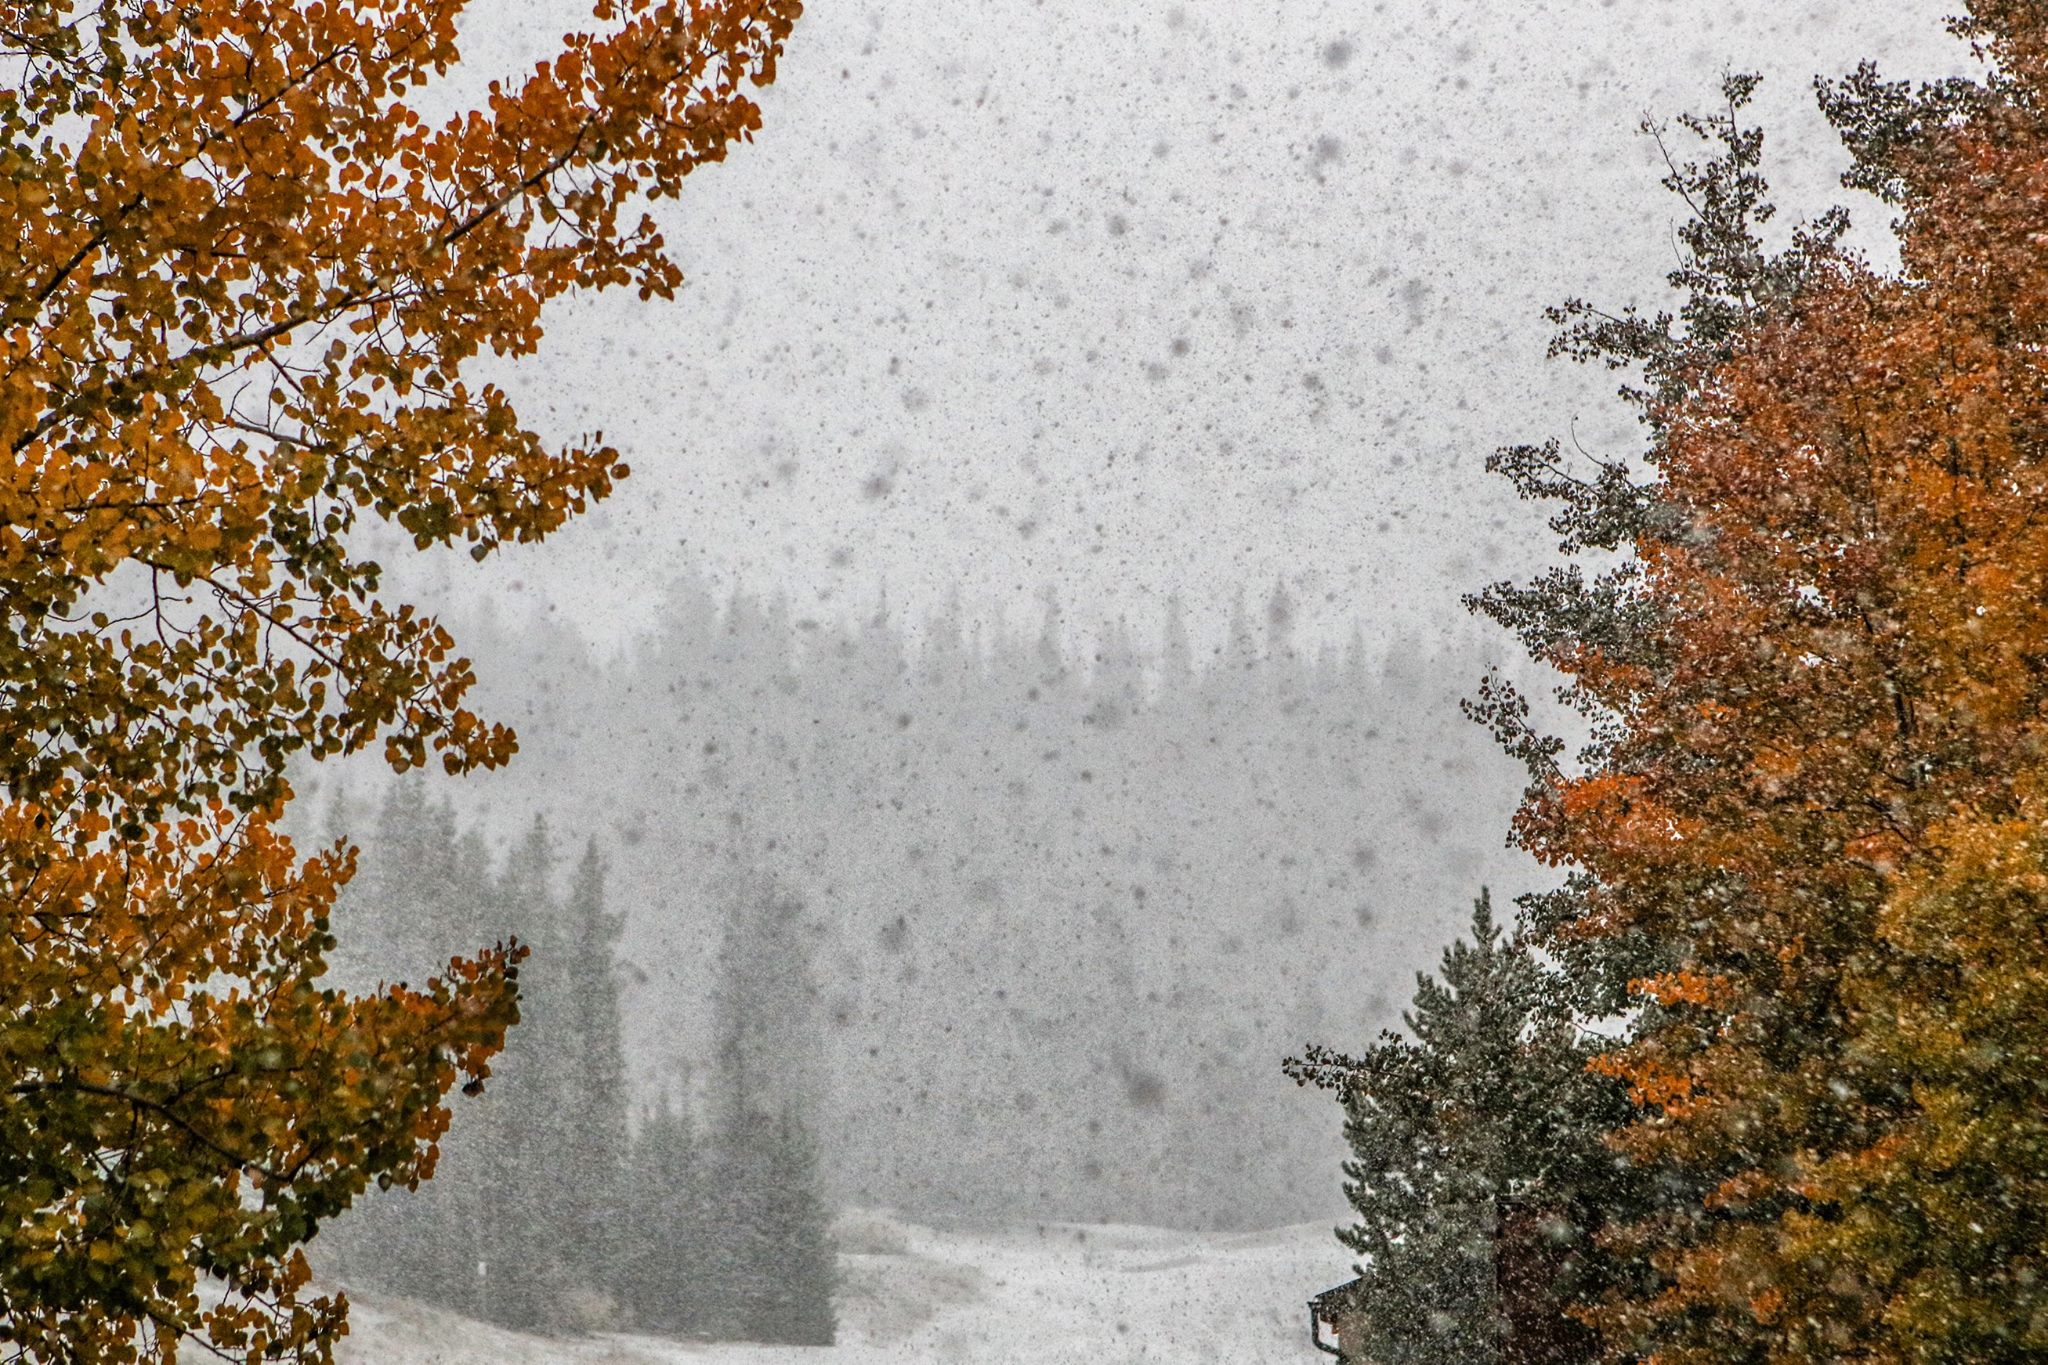 Copper Mountain, CO on September 23rd, 2016. photo: copper mt.